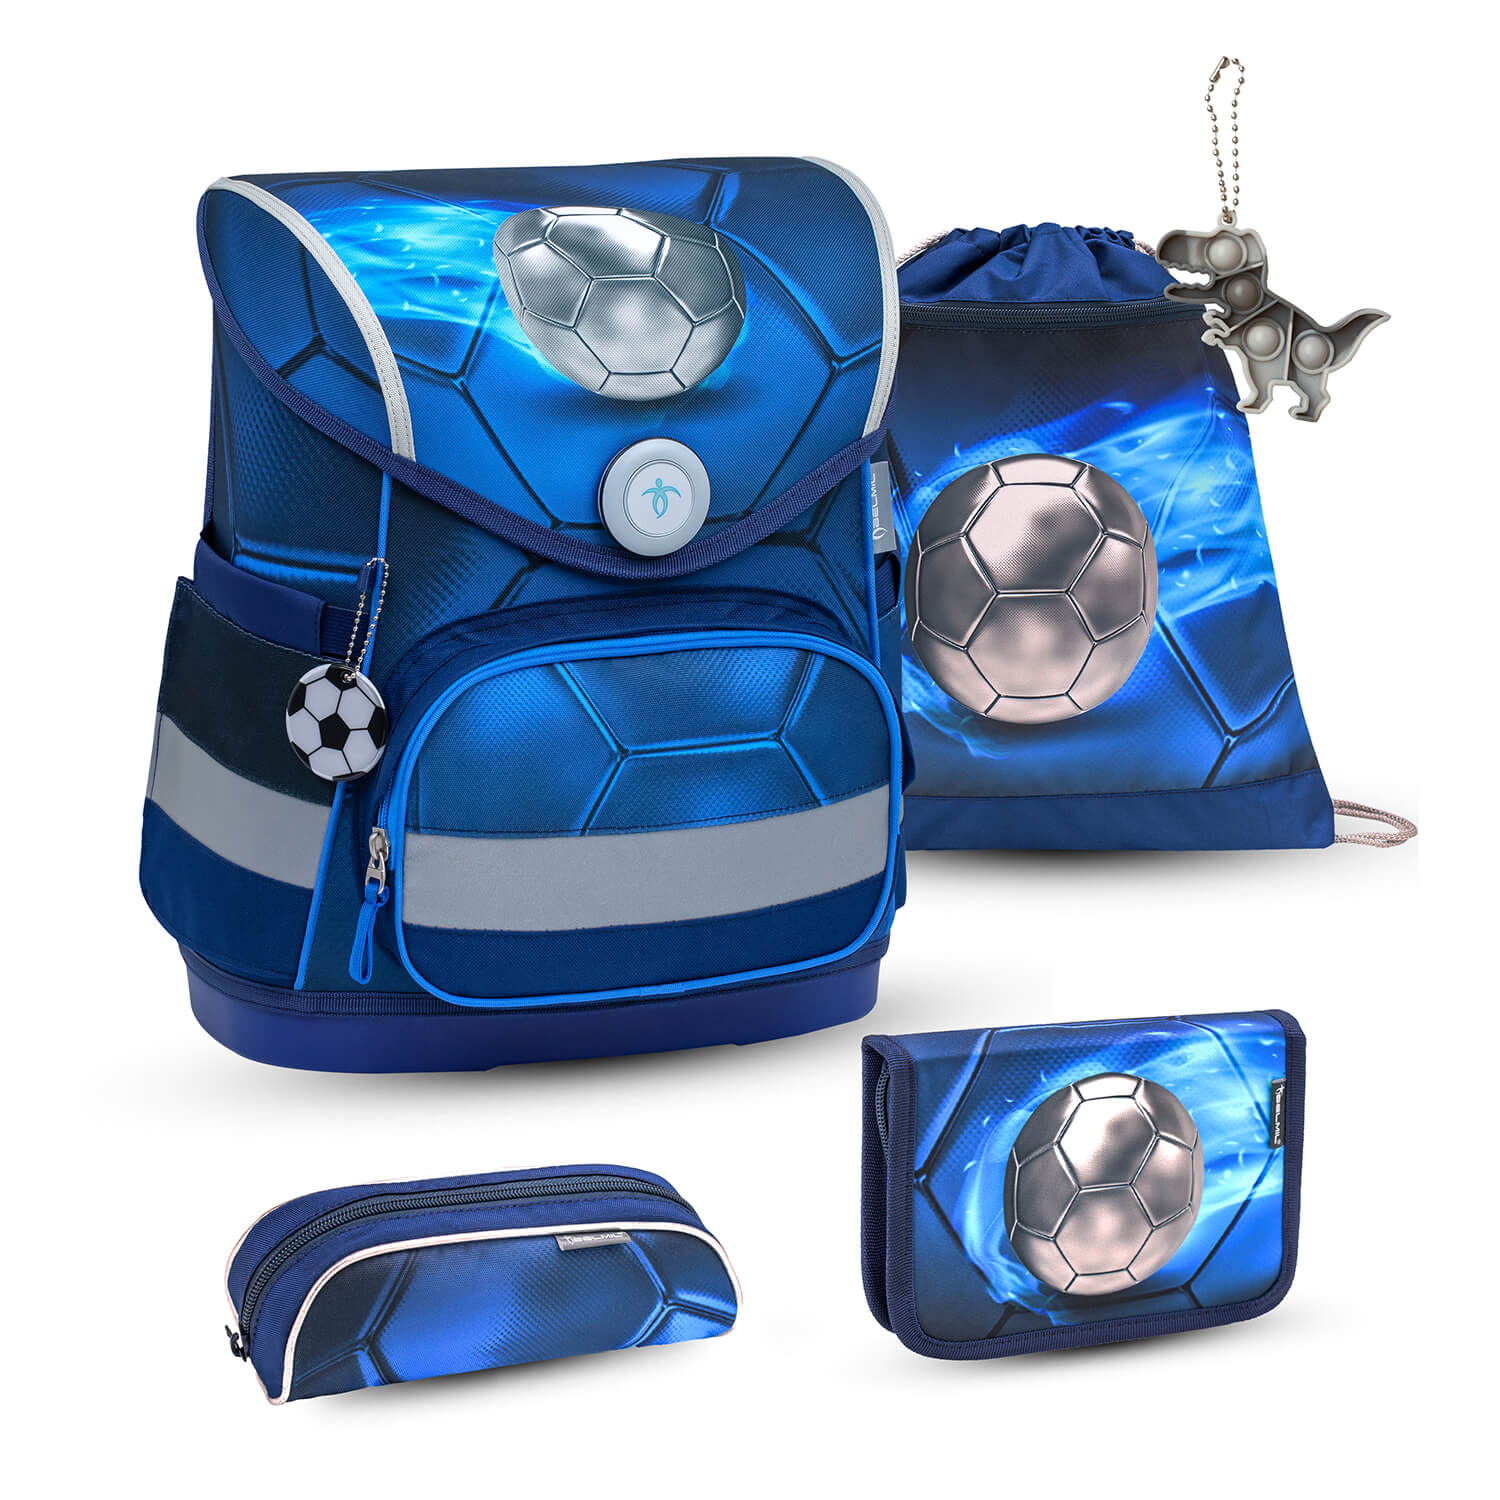 Compact Football 4 schoolbag set 5 pcs with GRATIS keychain